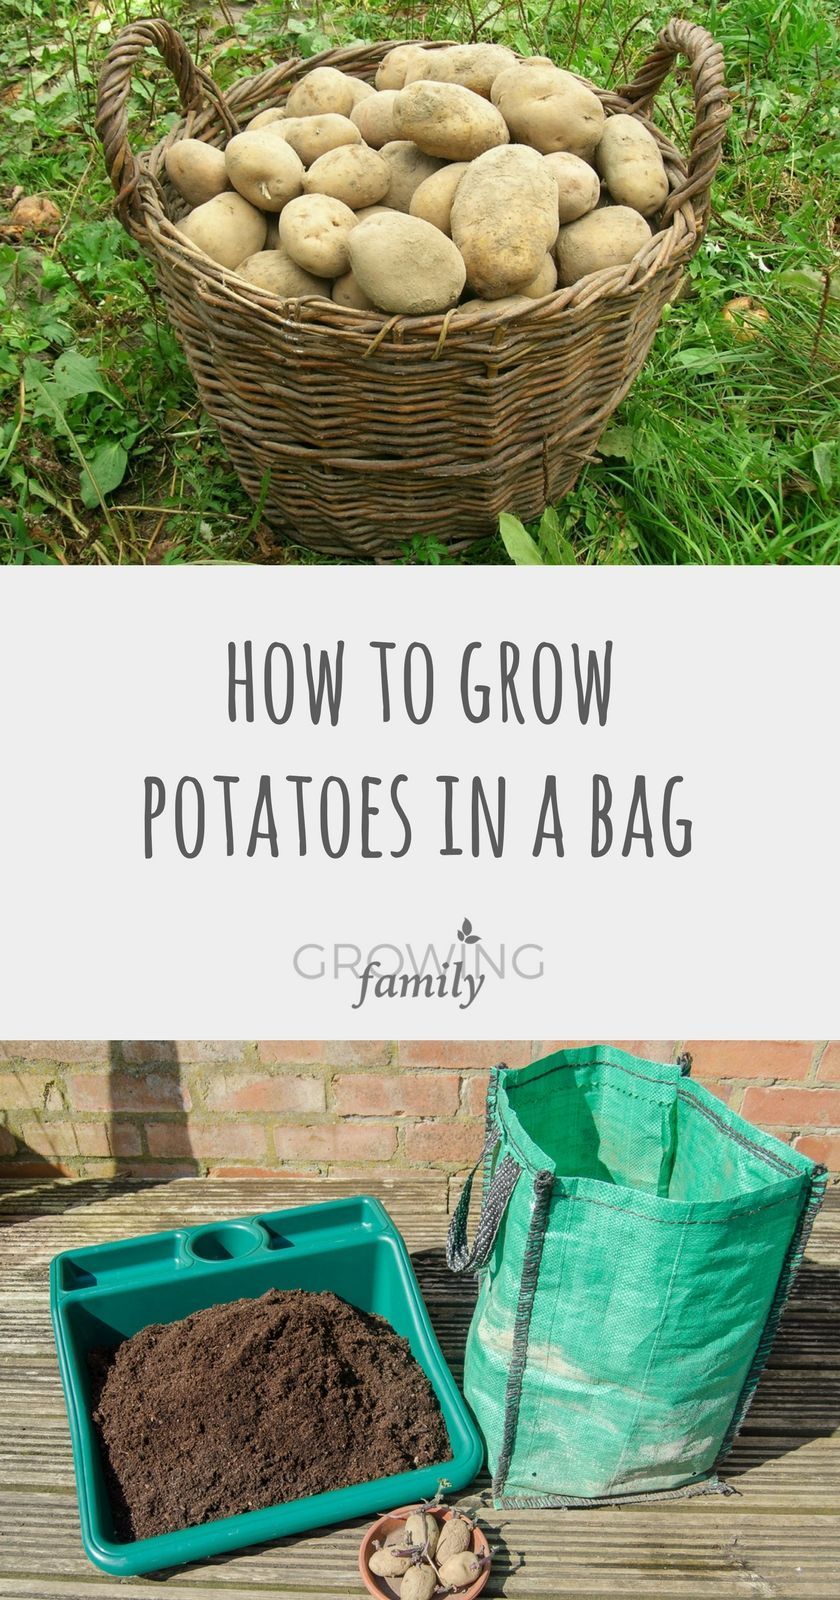 How to grow potatoes in a bag -   25 garden quotes small spaces
 ideas